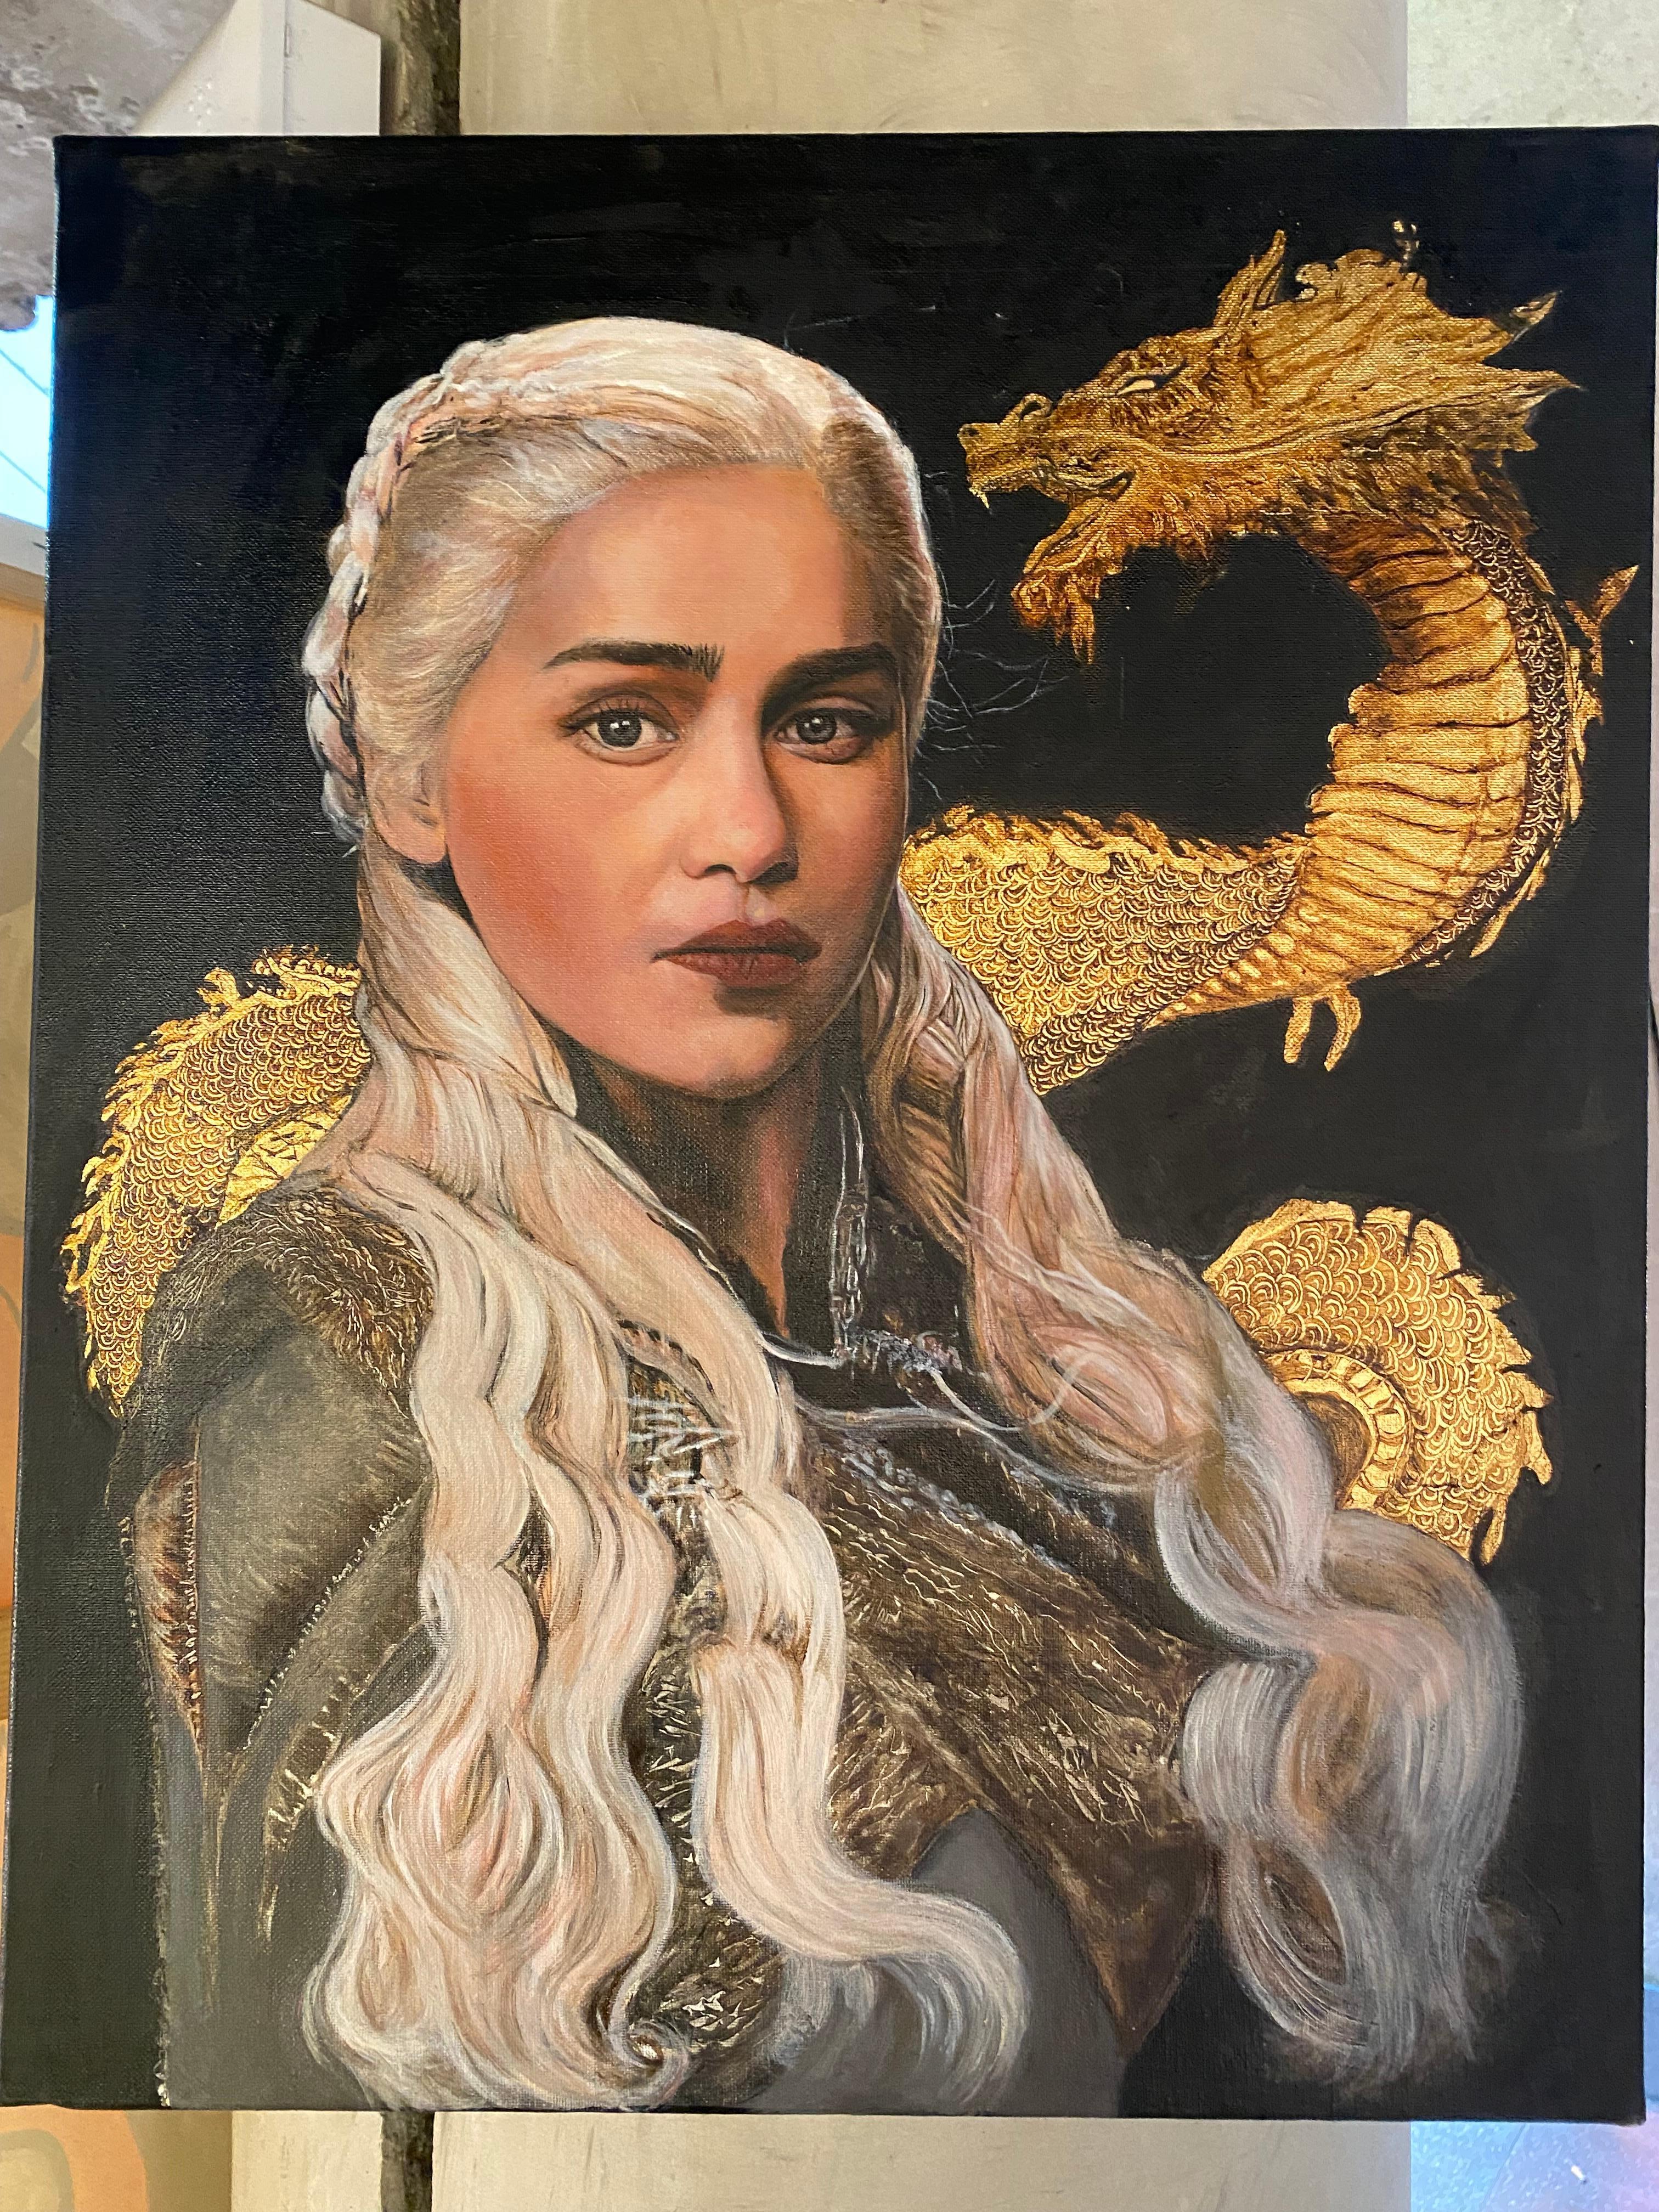 Slice
Daenerys ( game of thrones)
Oil painting and 22 carat gold leaf 
On linen canvas and frame
50 x 61 cms
Title, signature and date on the back 
Certificate of the artist 
2900 euros.